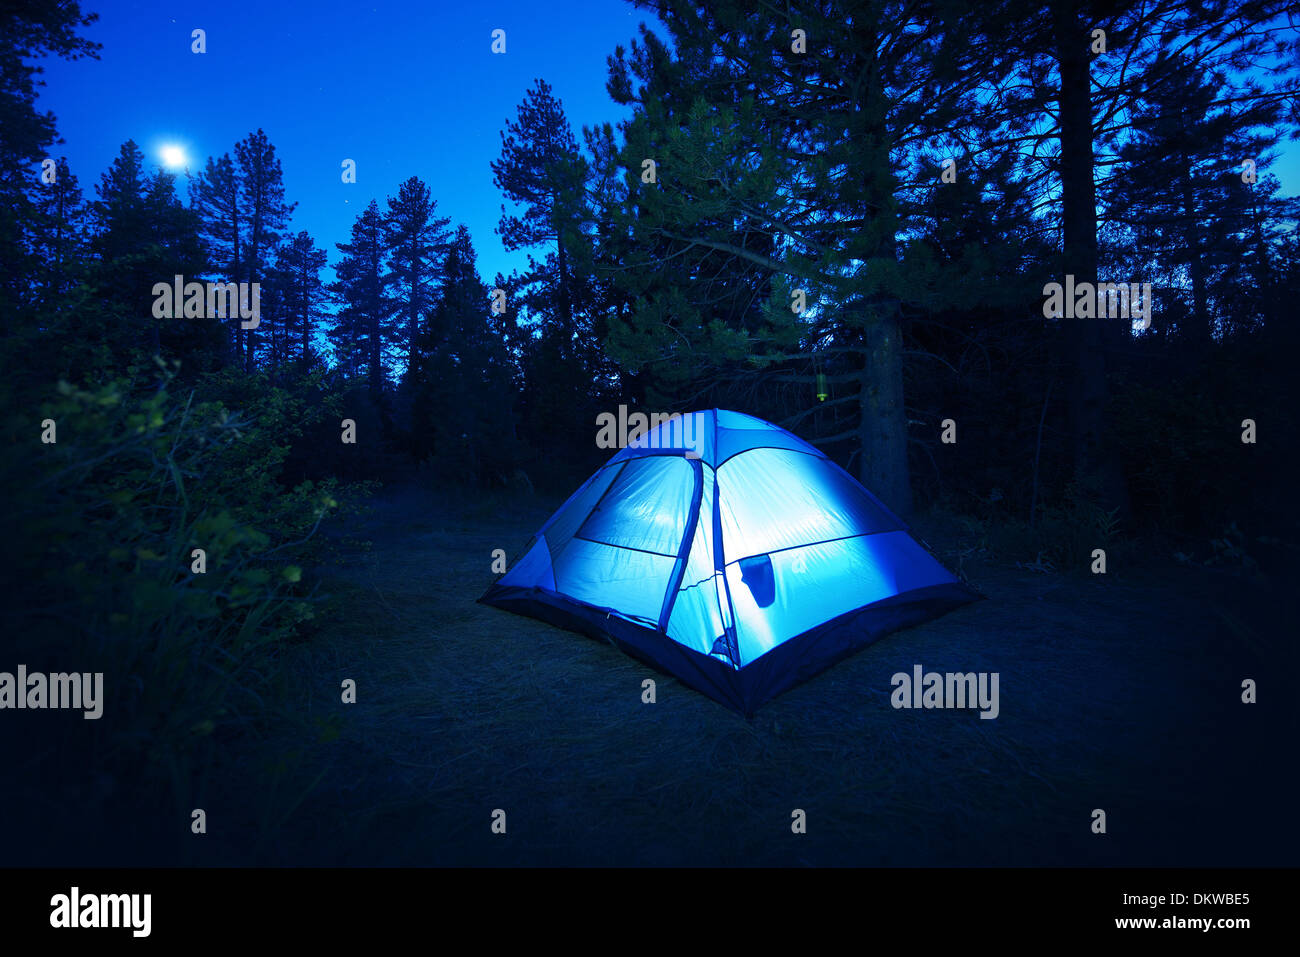 Forest Camping - Small Illuminated Tent at Night. Camping in California Forest, USA. Camping and Outdoor Photo Collection. Stock Photo